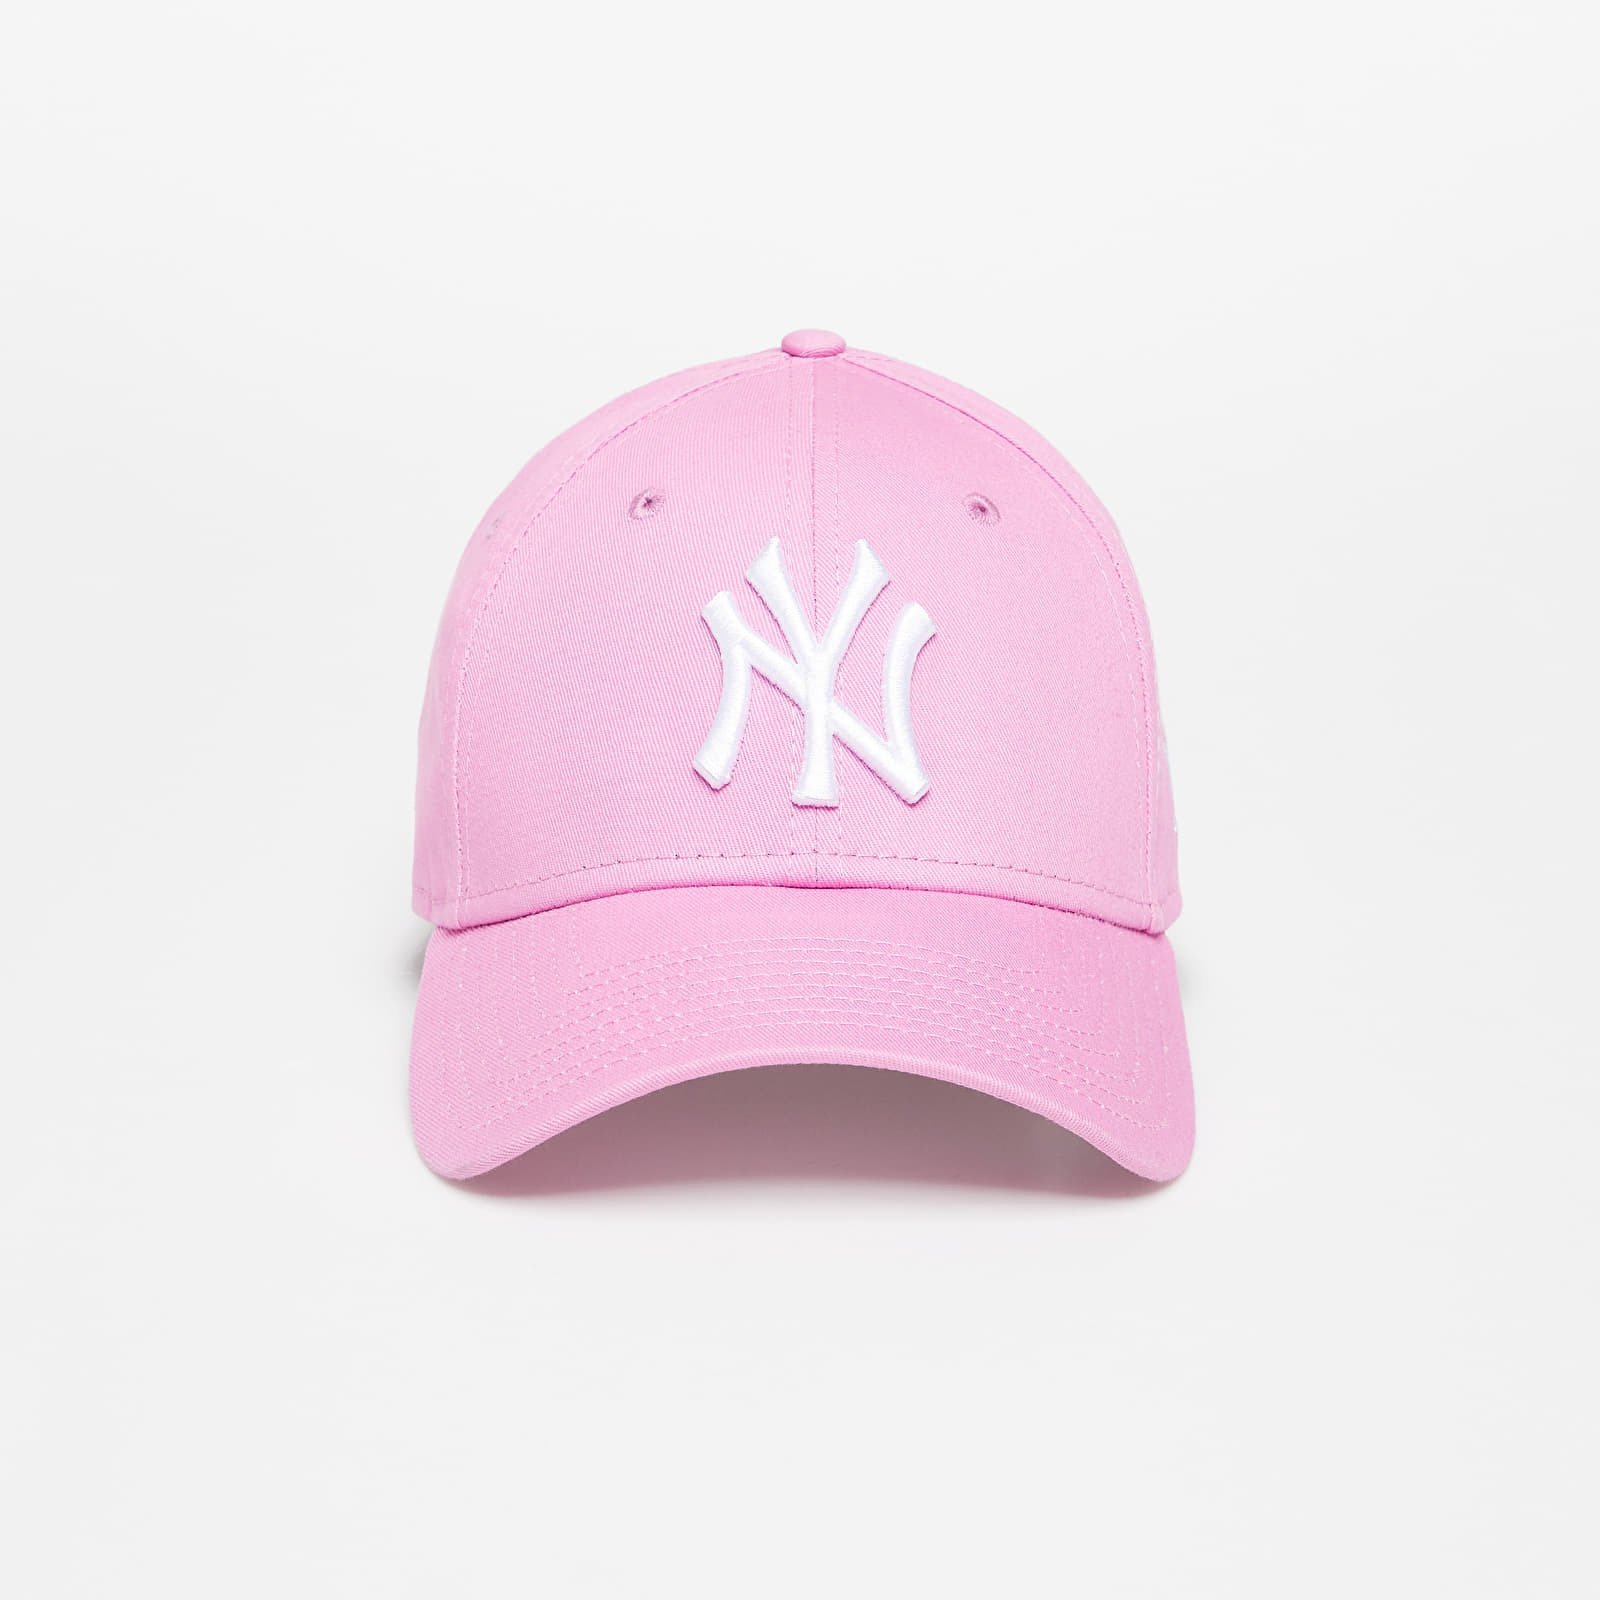 New York Yankees League Essential 9FORTY Cap